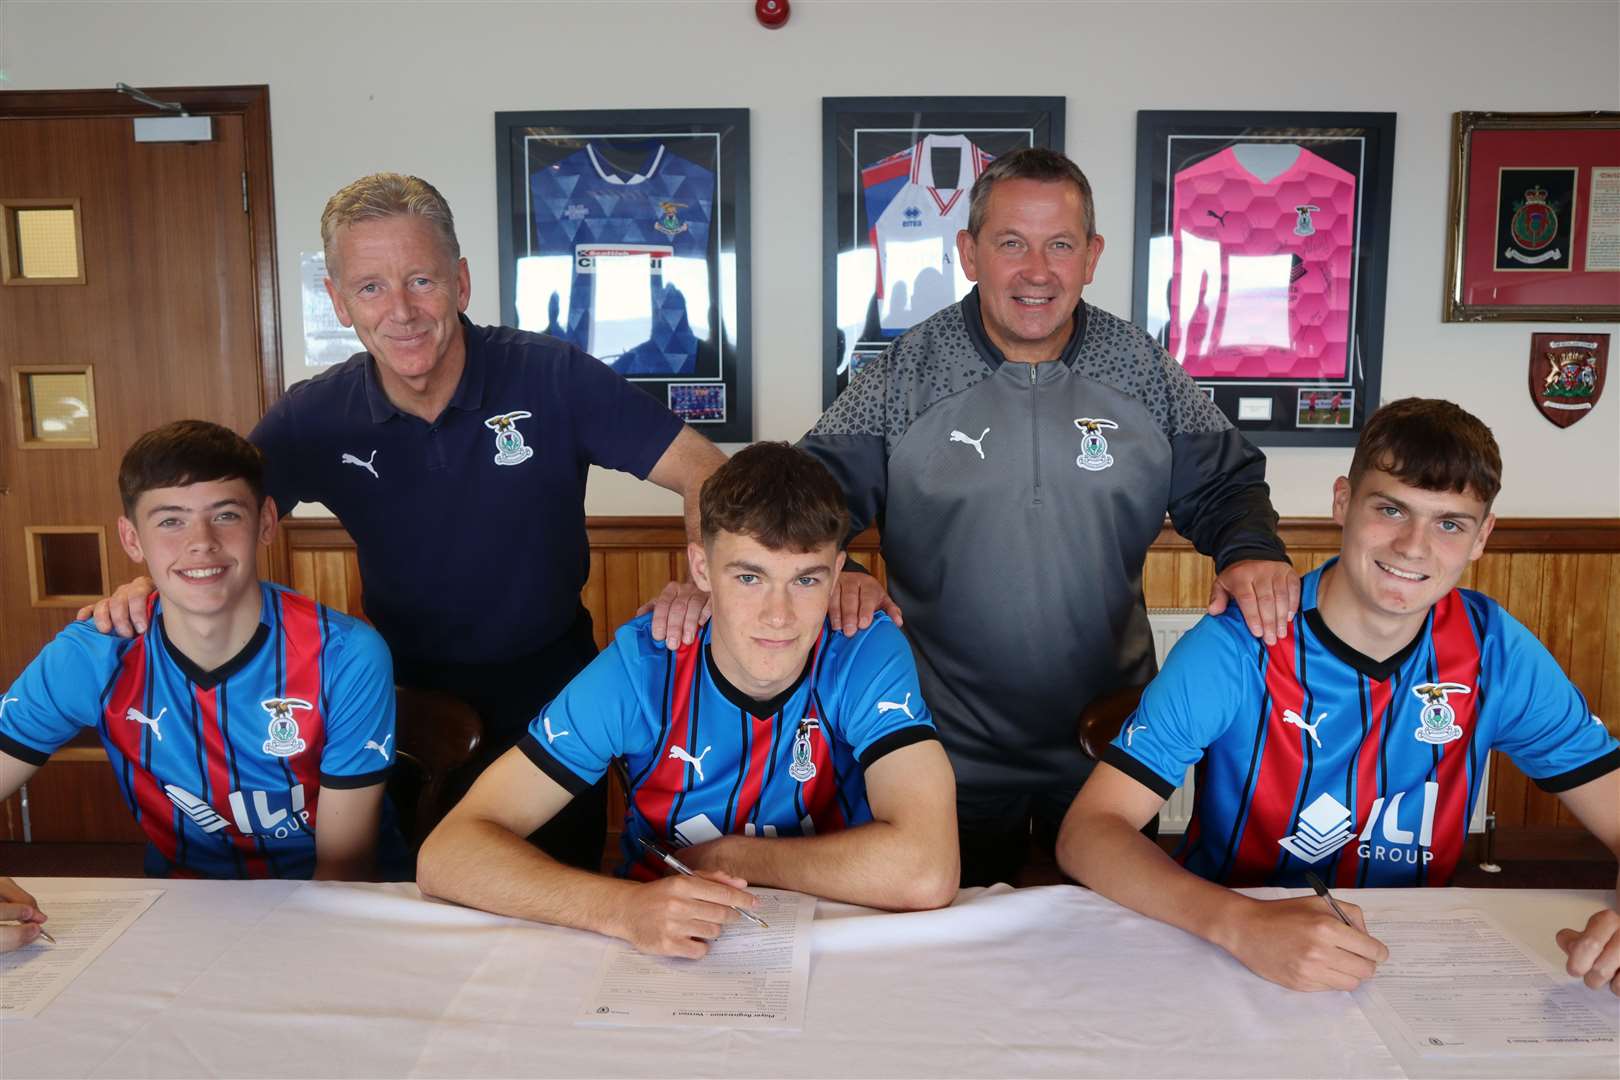 Calum MacLeod (left) along with Sam Nixon and Jack Walker were signed as modern apprentices back in August.